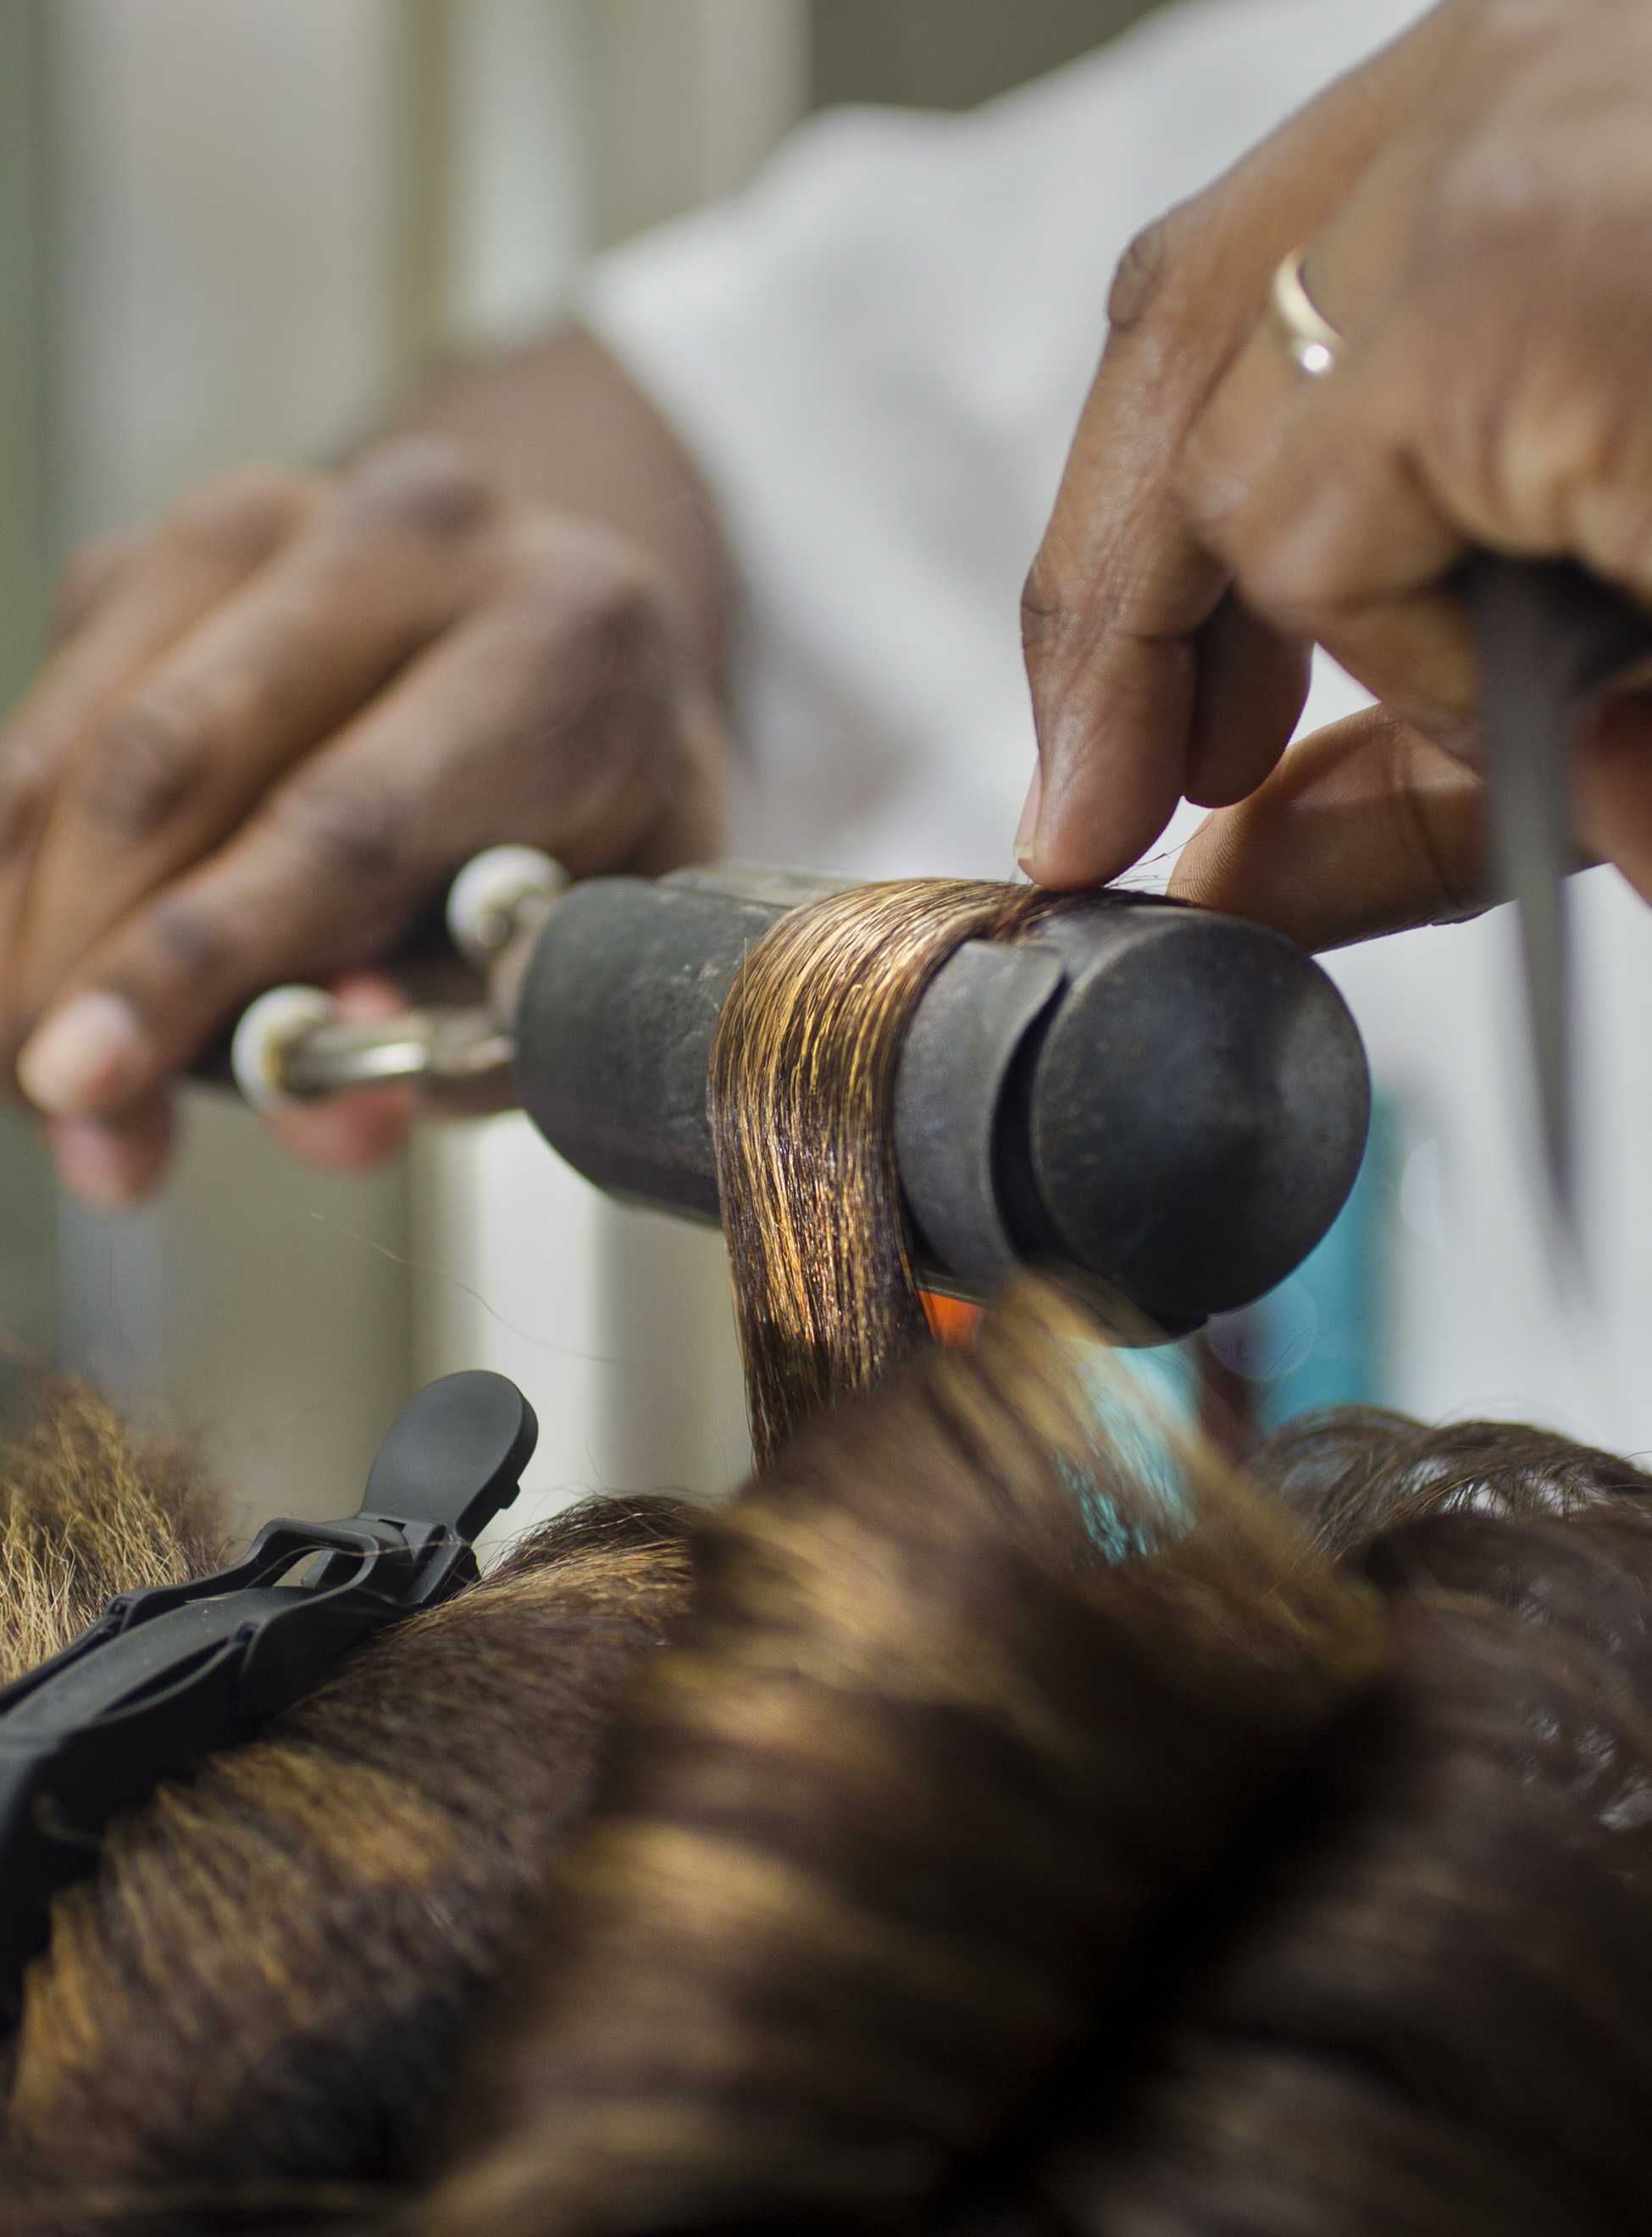 Some women get their hair done with a curling iron for their dates. (Allison Long/Kansas City Star/MCT)